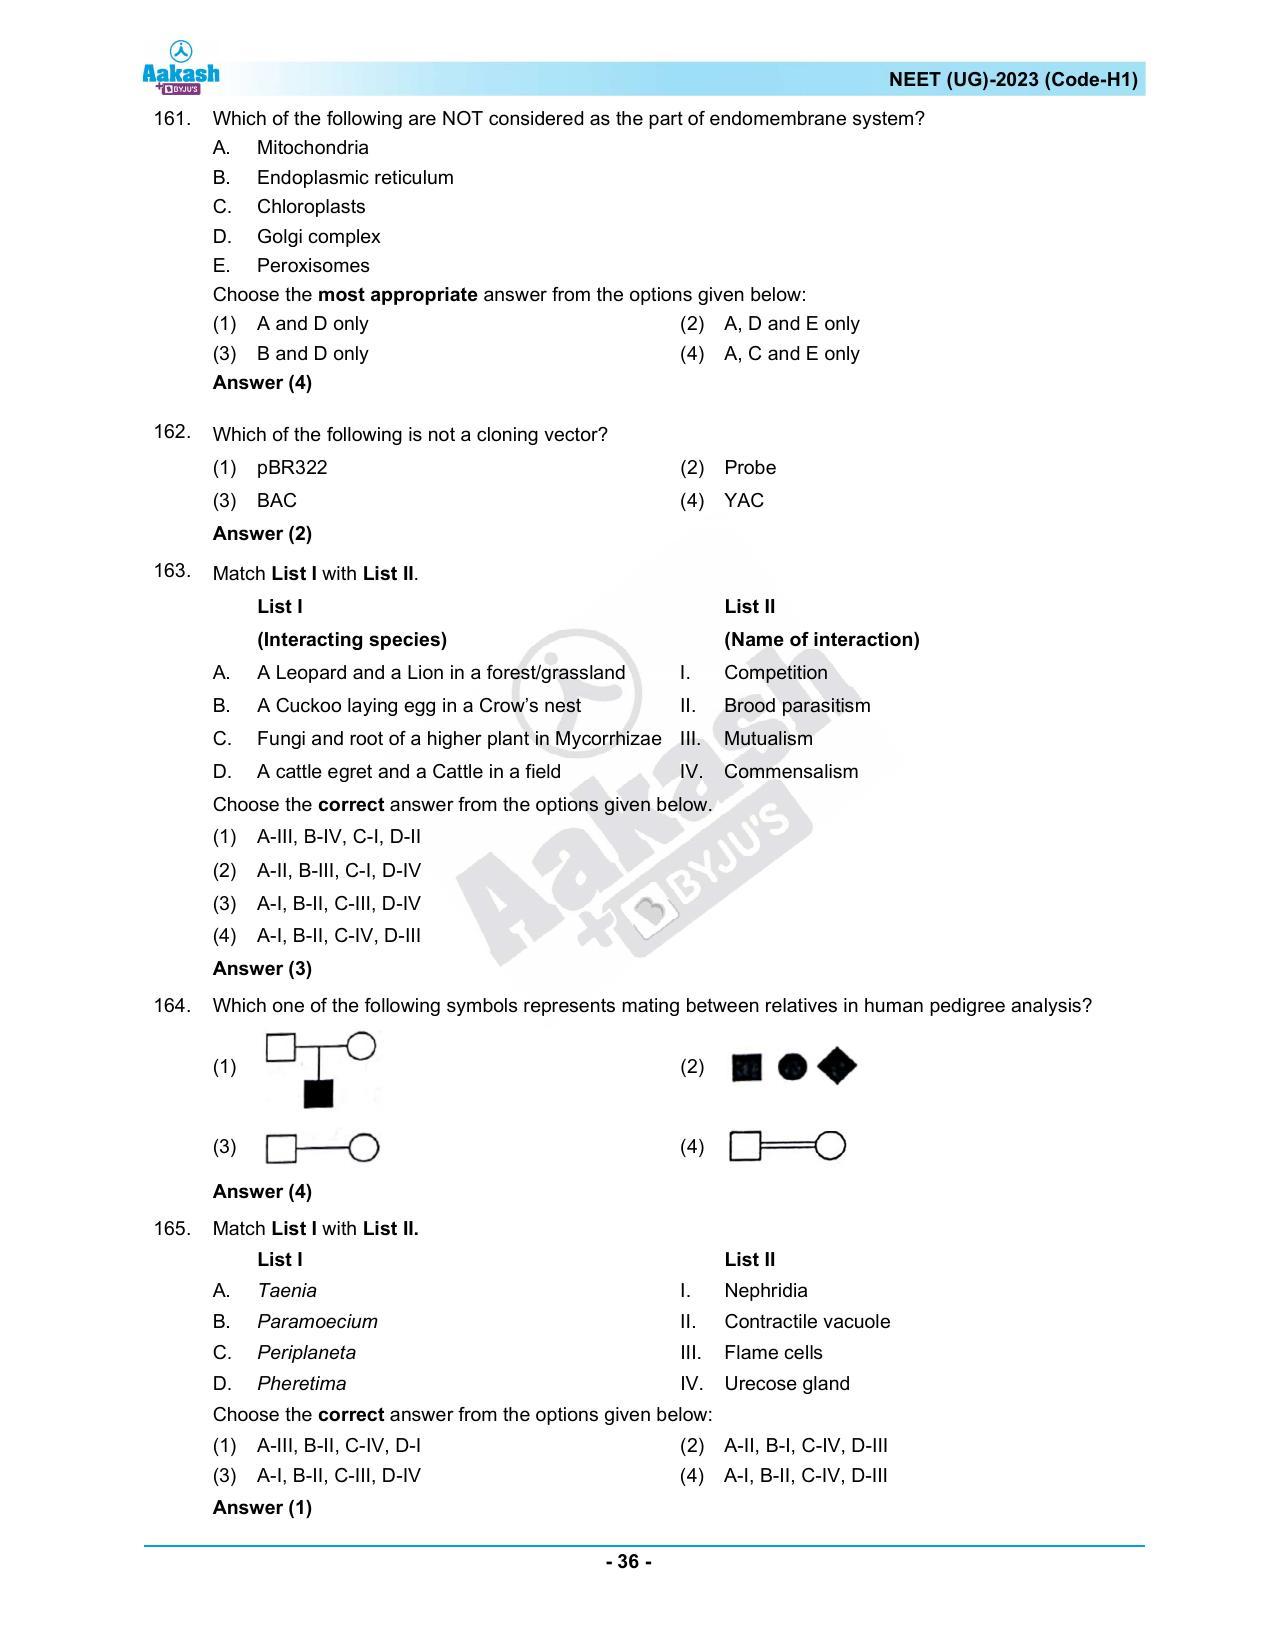 NEET 2023 Question Paper H1 - Page 36